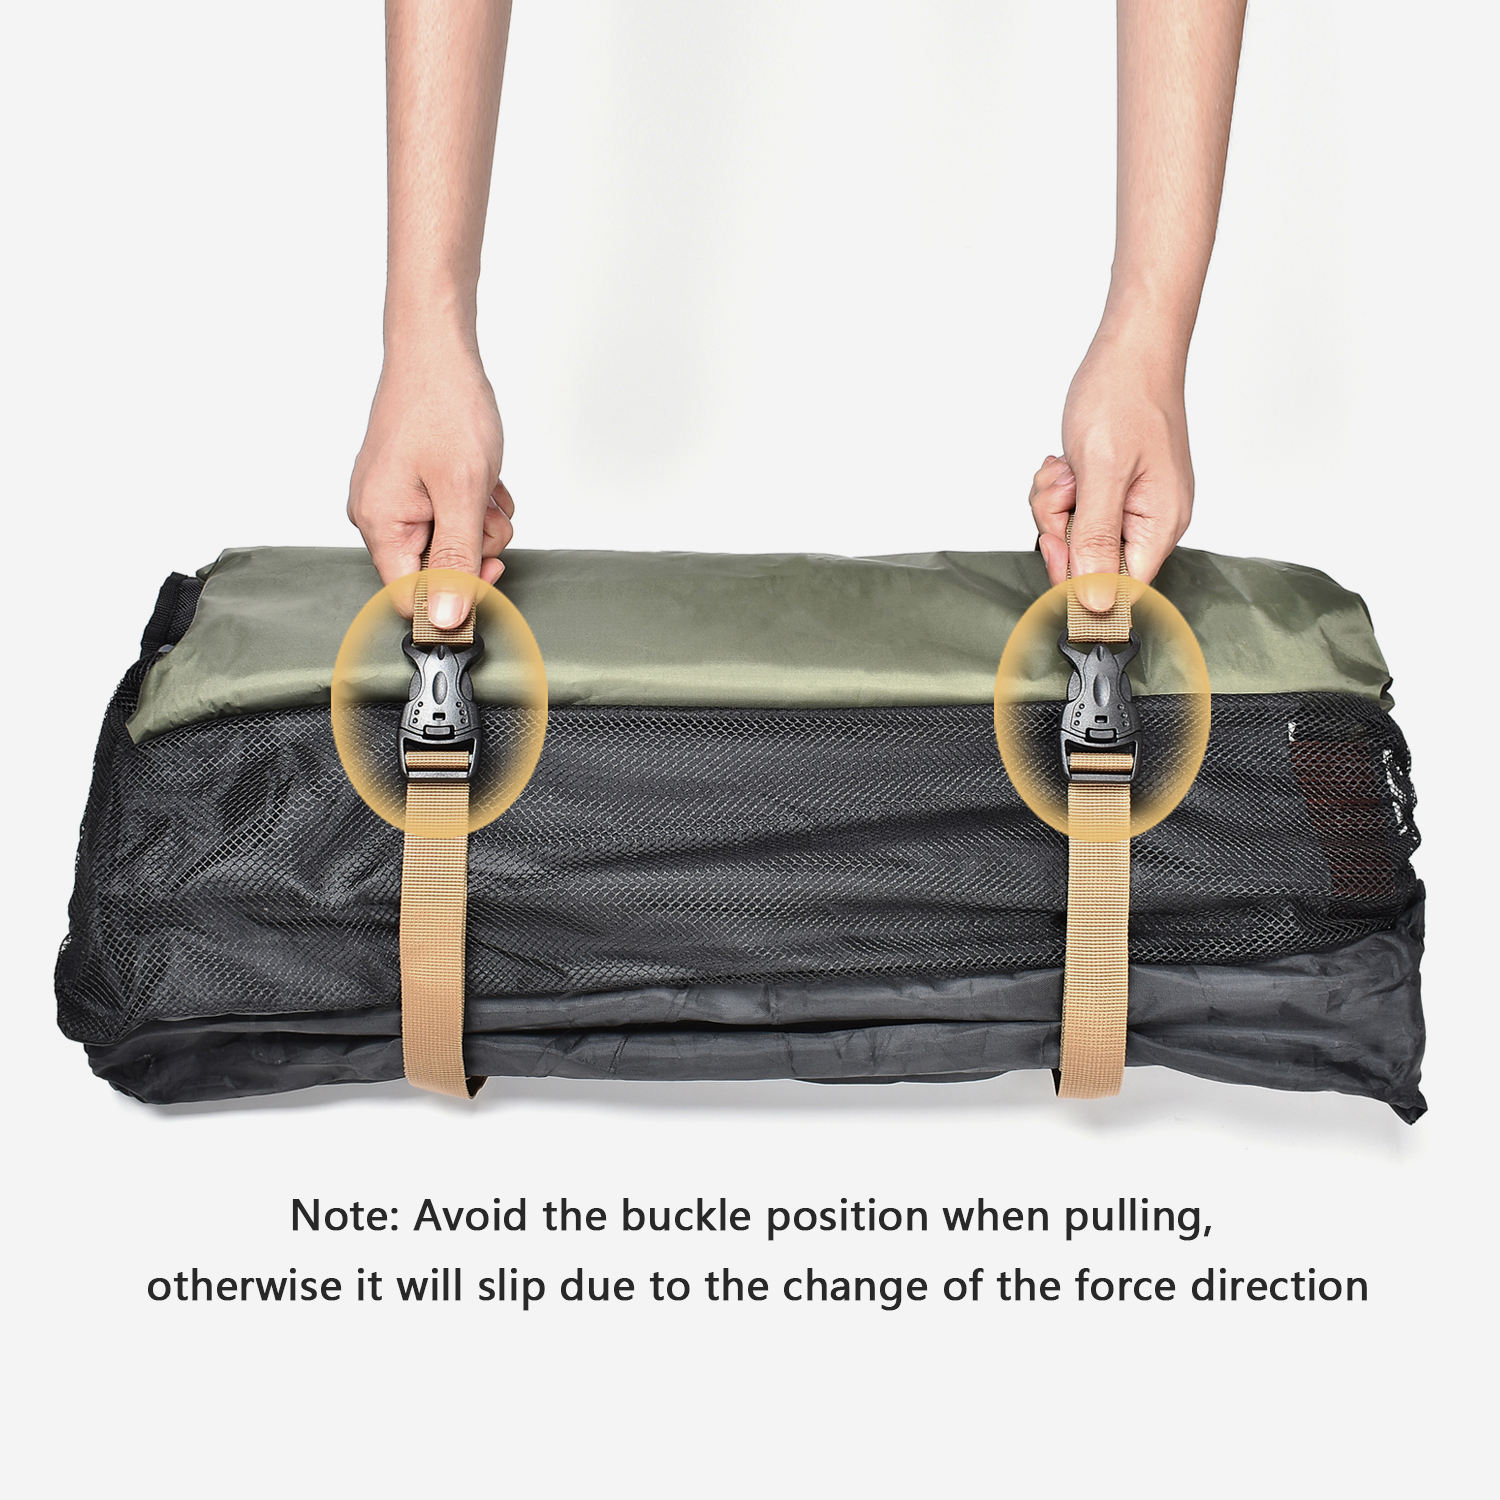 Outdoor-Luggage-Binding-With-Double-Insurance-Buckle-Type-Suitcase-Packing-Safety-Belt-Cargo-Bundlin-1696603-3